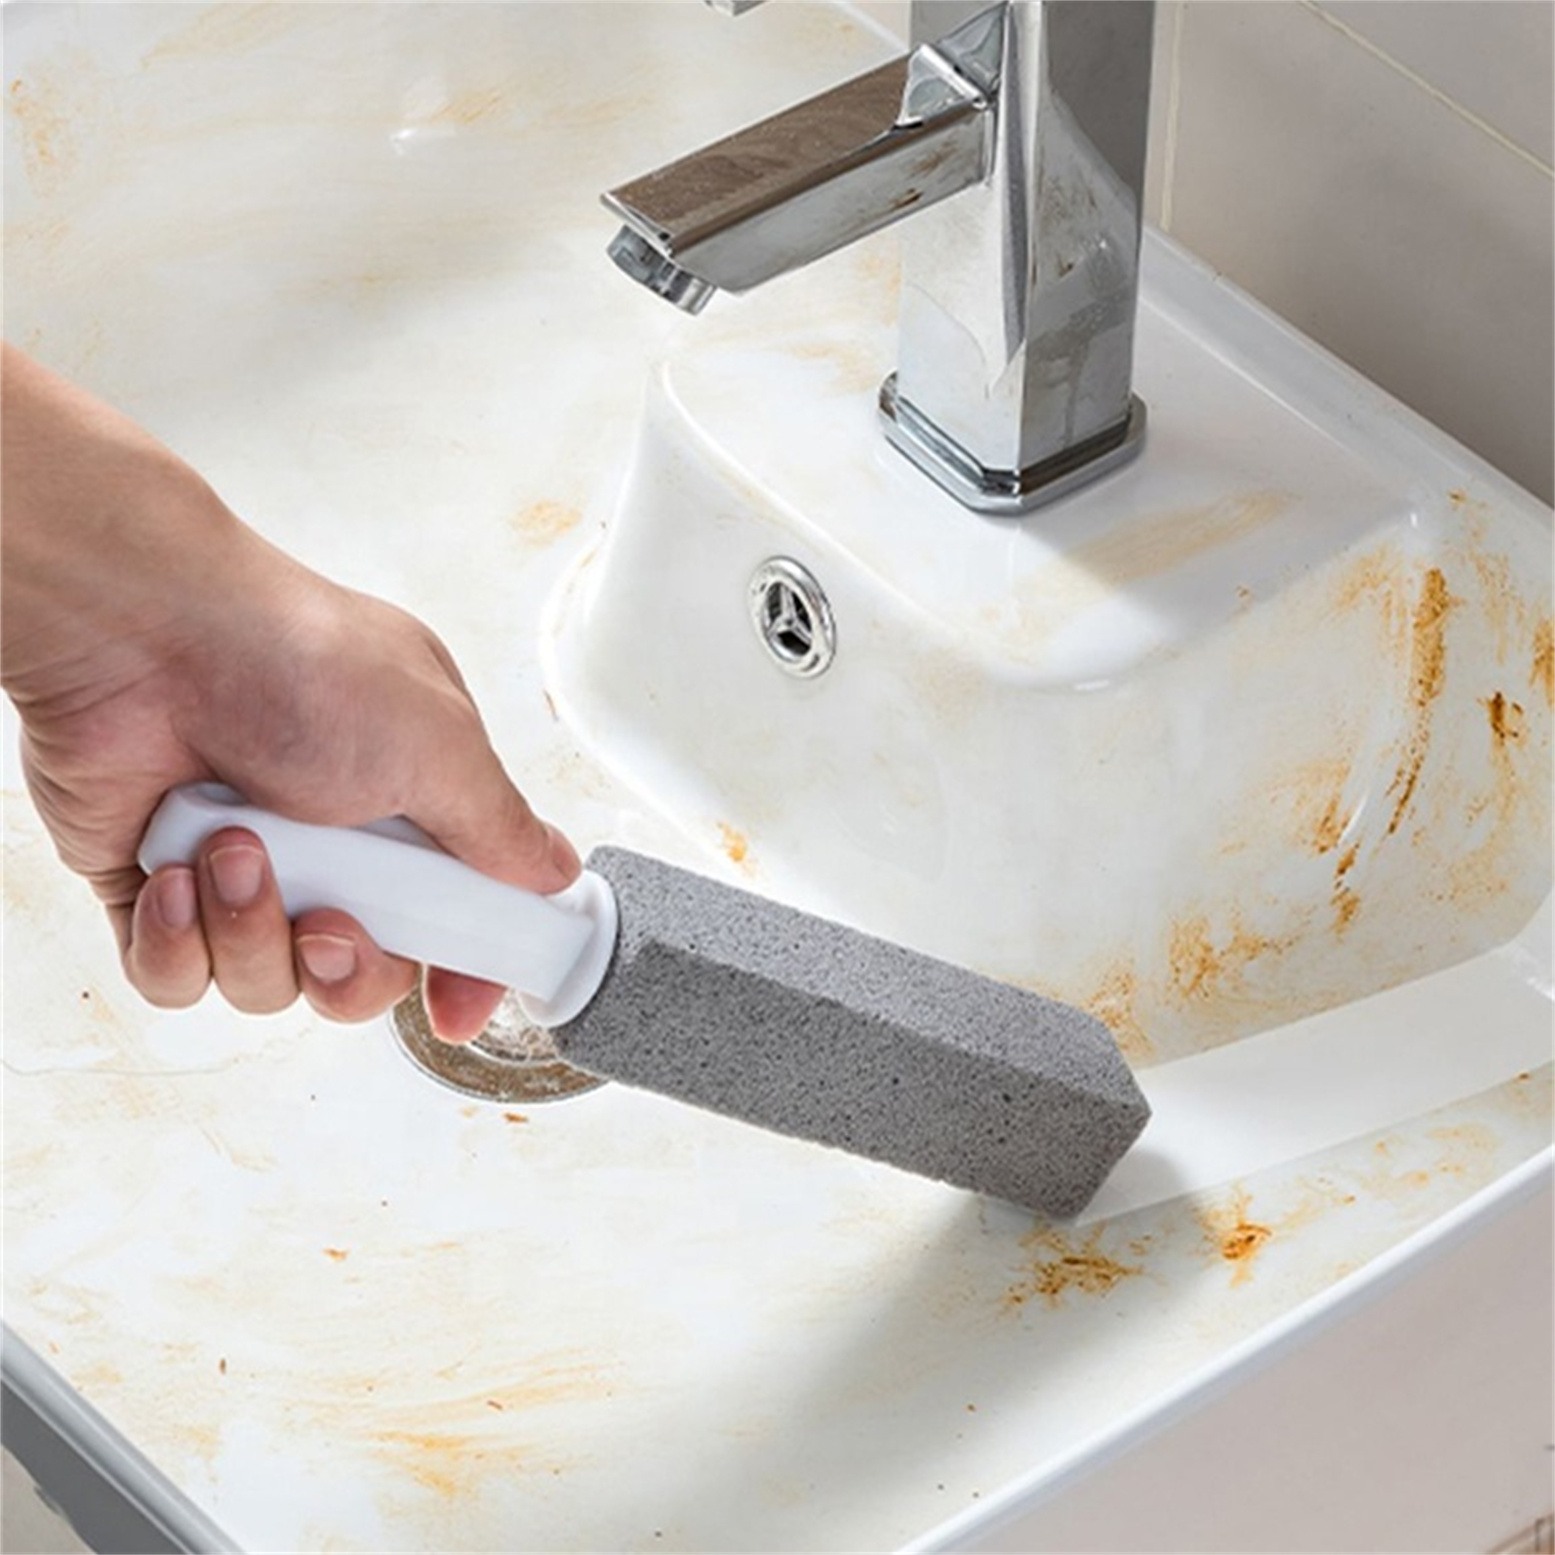 1pcs Grill Cleaning Brick Block 1pcs Pumice Stone Toilet Bowl Cleaner with Handle